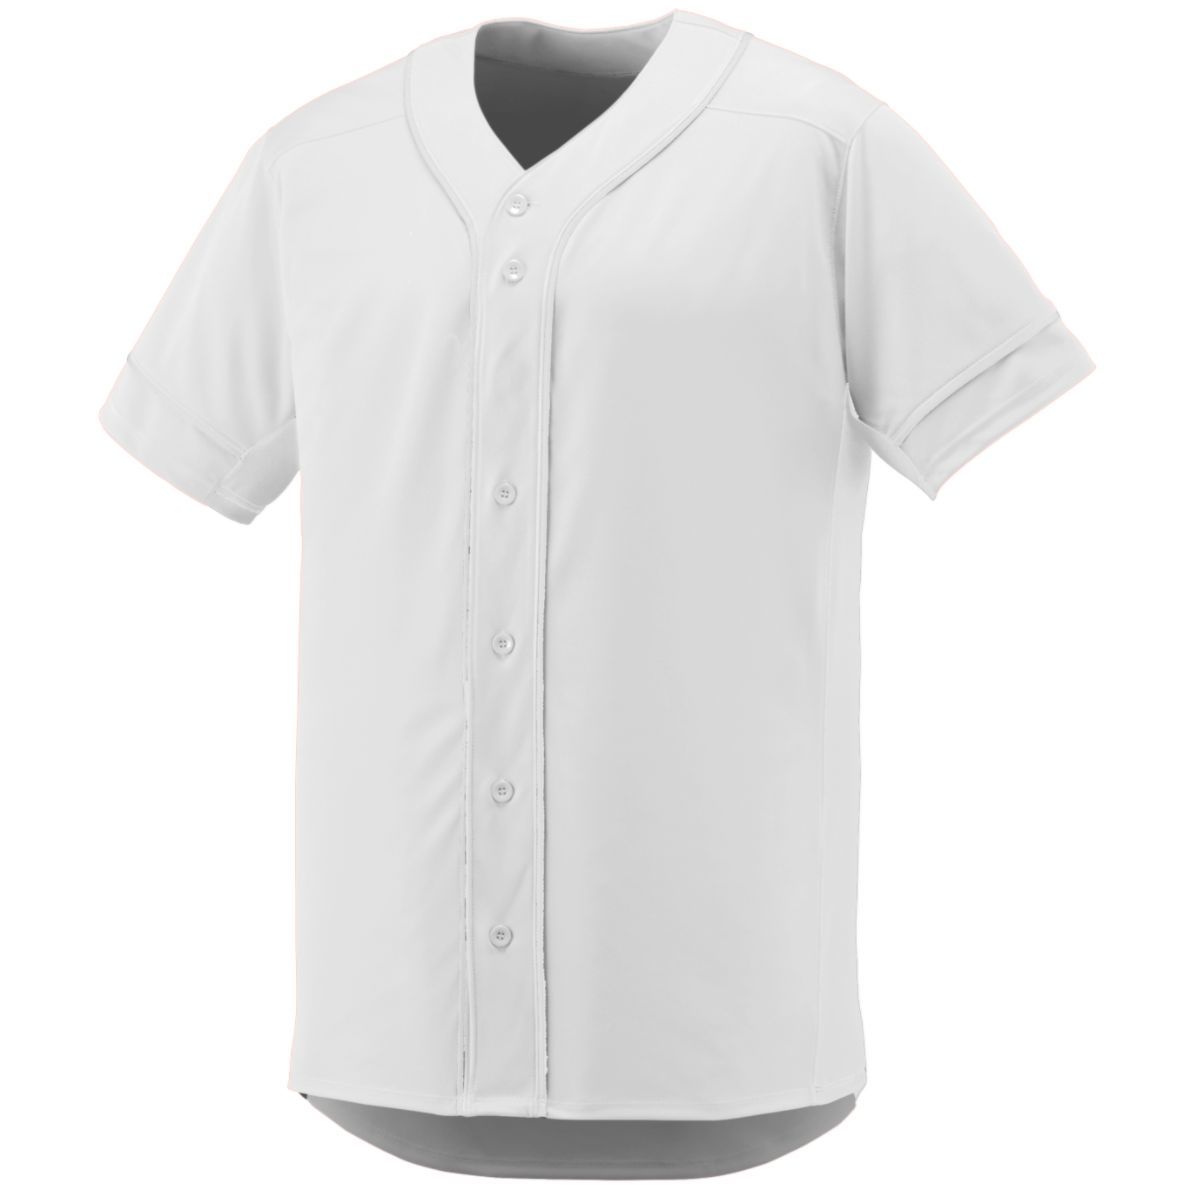 Augusta Sportswear Slugger Jersey in White/White  -Part of the Adult, Adult-Jersey, Augusta-Products, Baseball, Shirts, All-Sports, All-Sports-1 product lines at KanaleyCreations.com